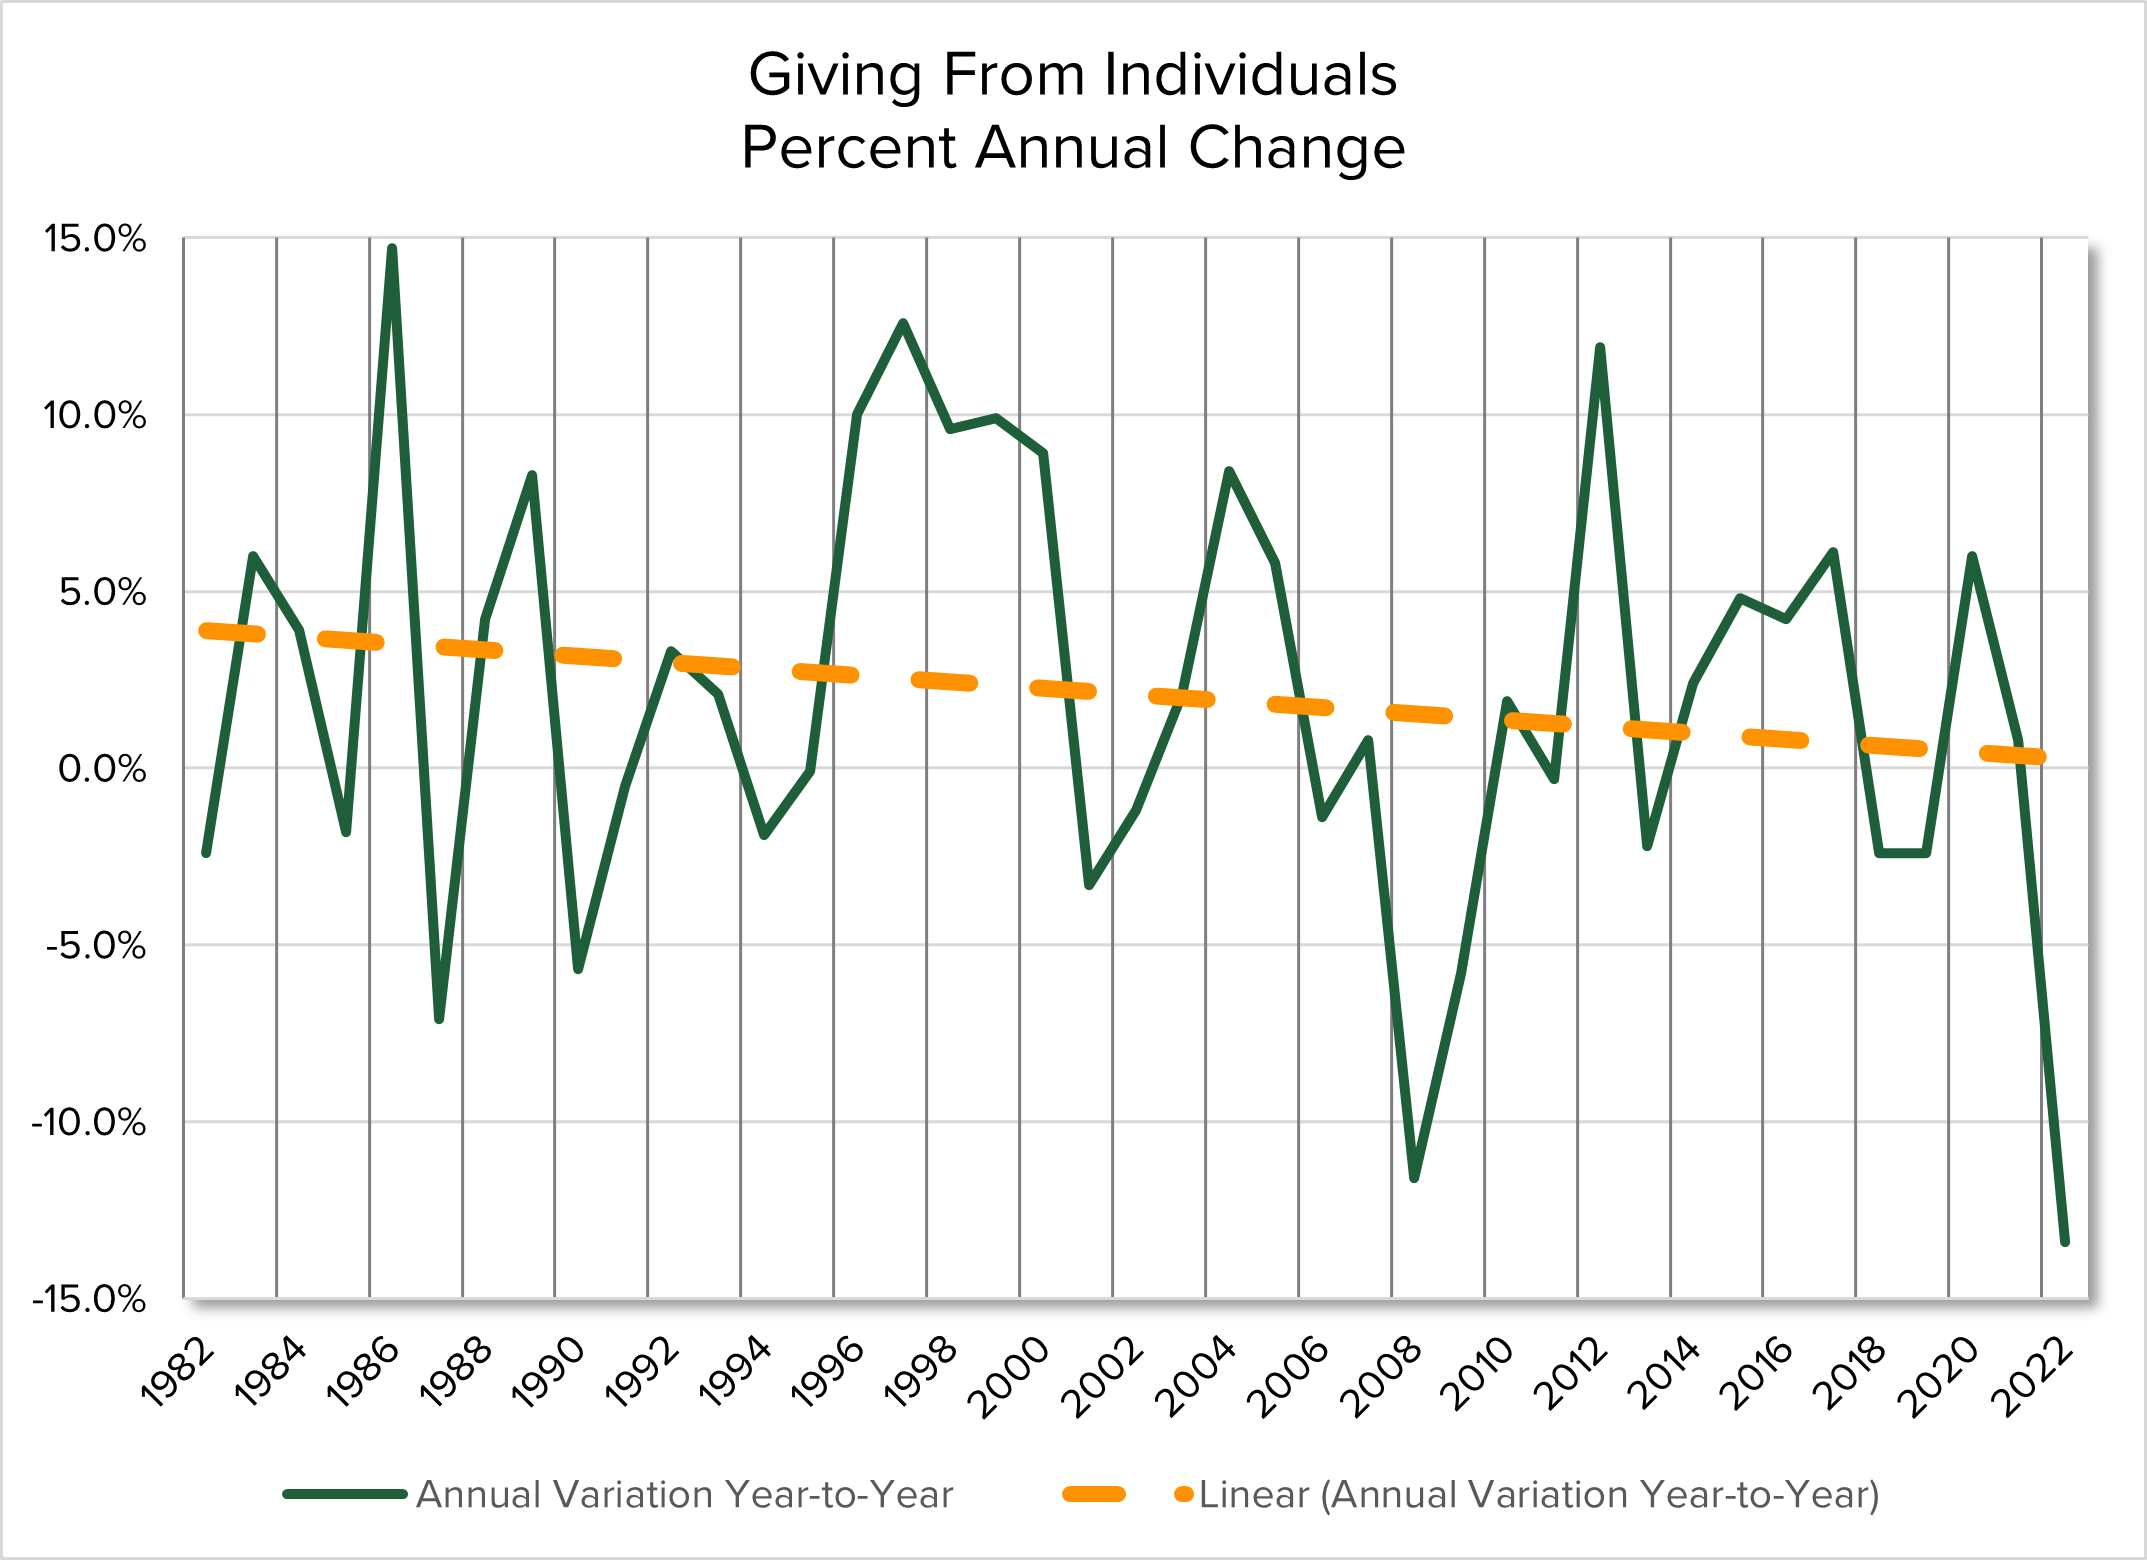 Line graph showing the percent annual change in giving from individuals from 1982-2022 with a linear trend line showing the overall drop from just under 5% in 1982 to just above 0% in 2022